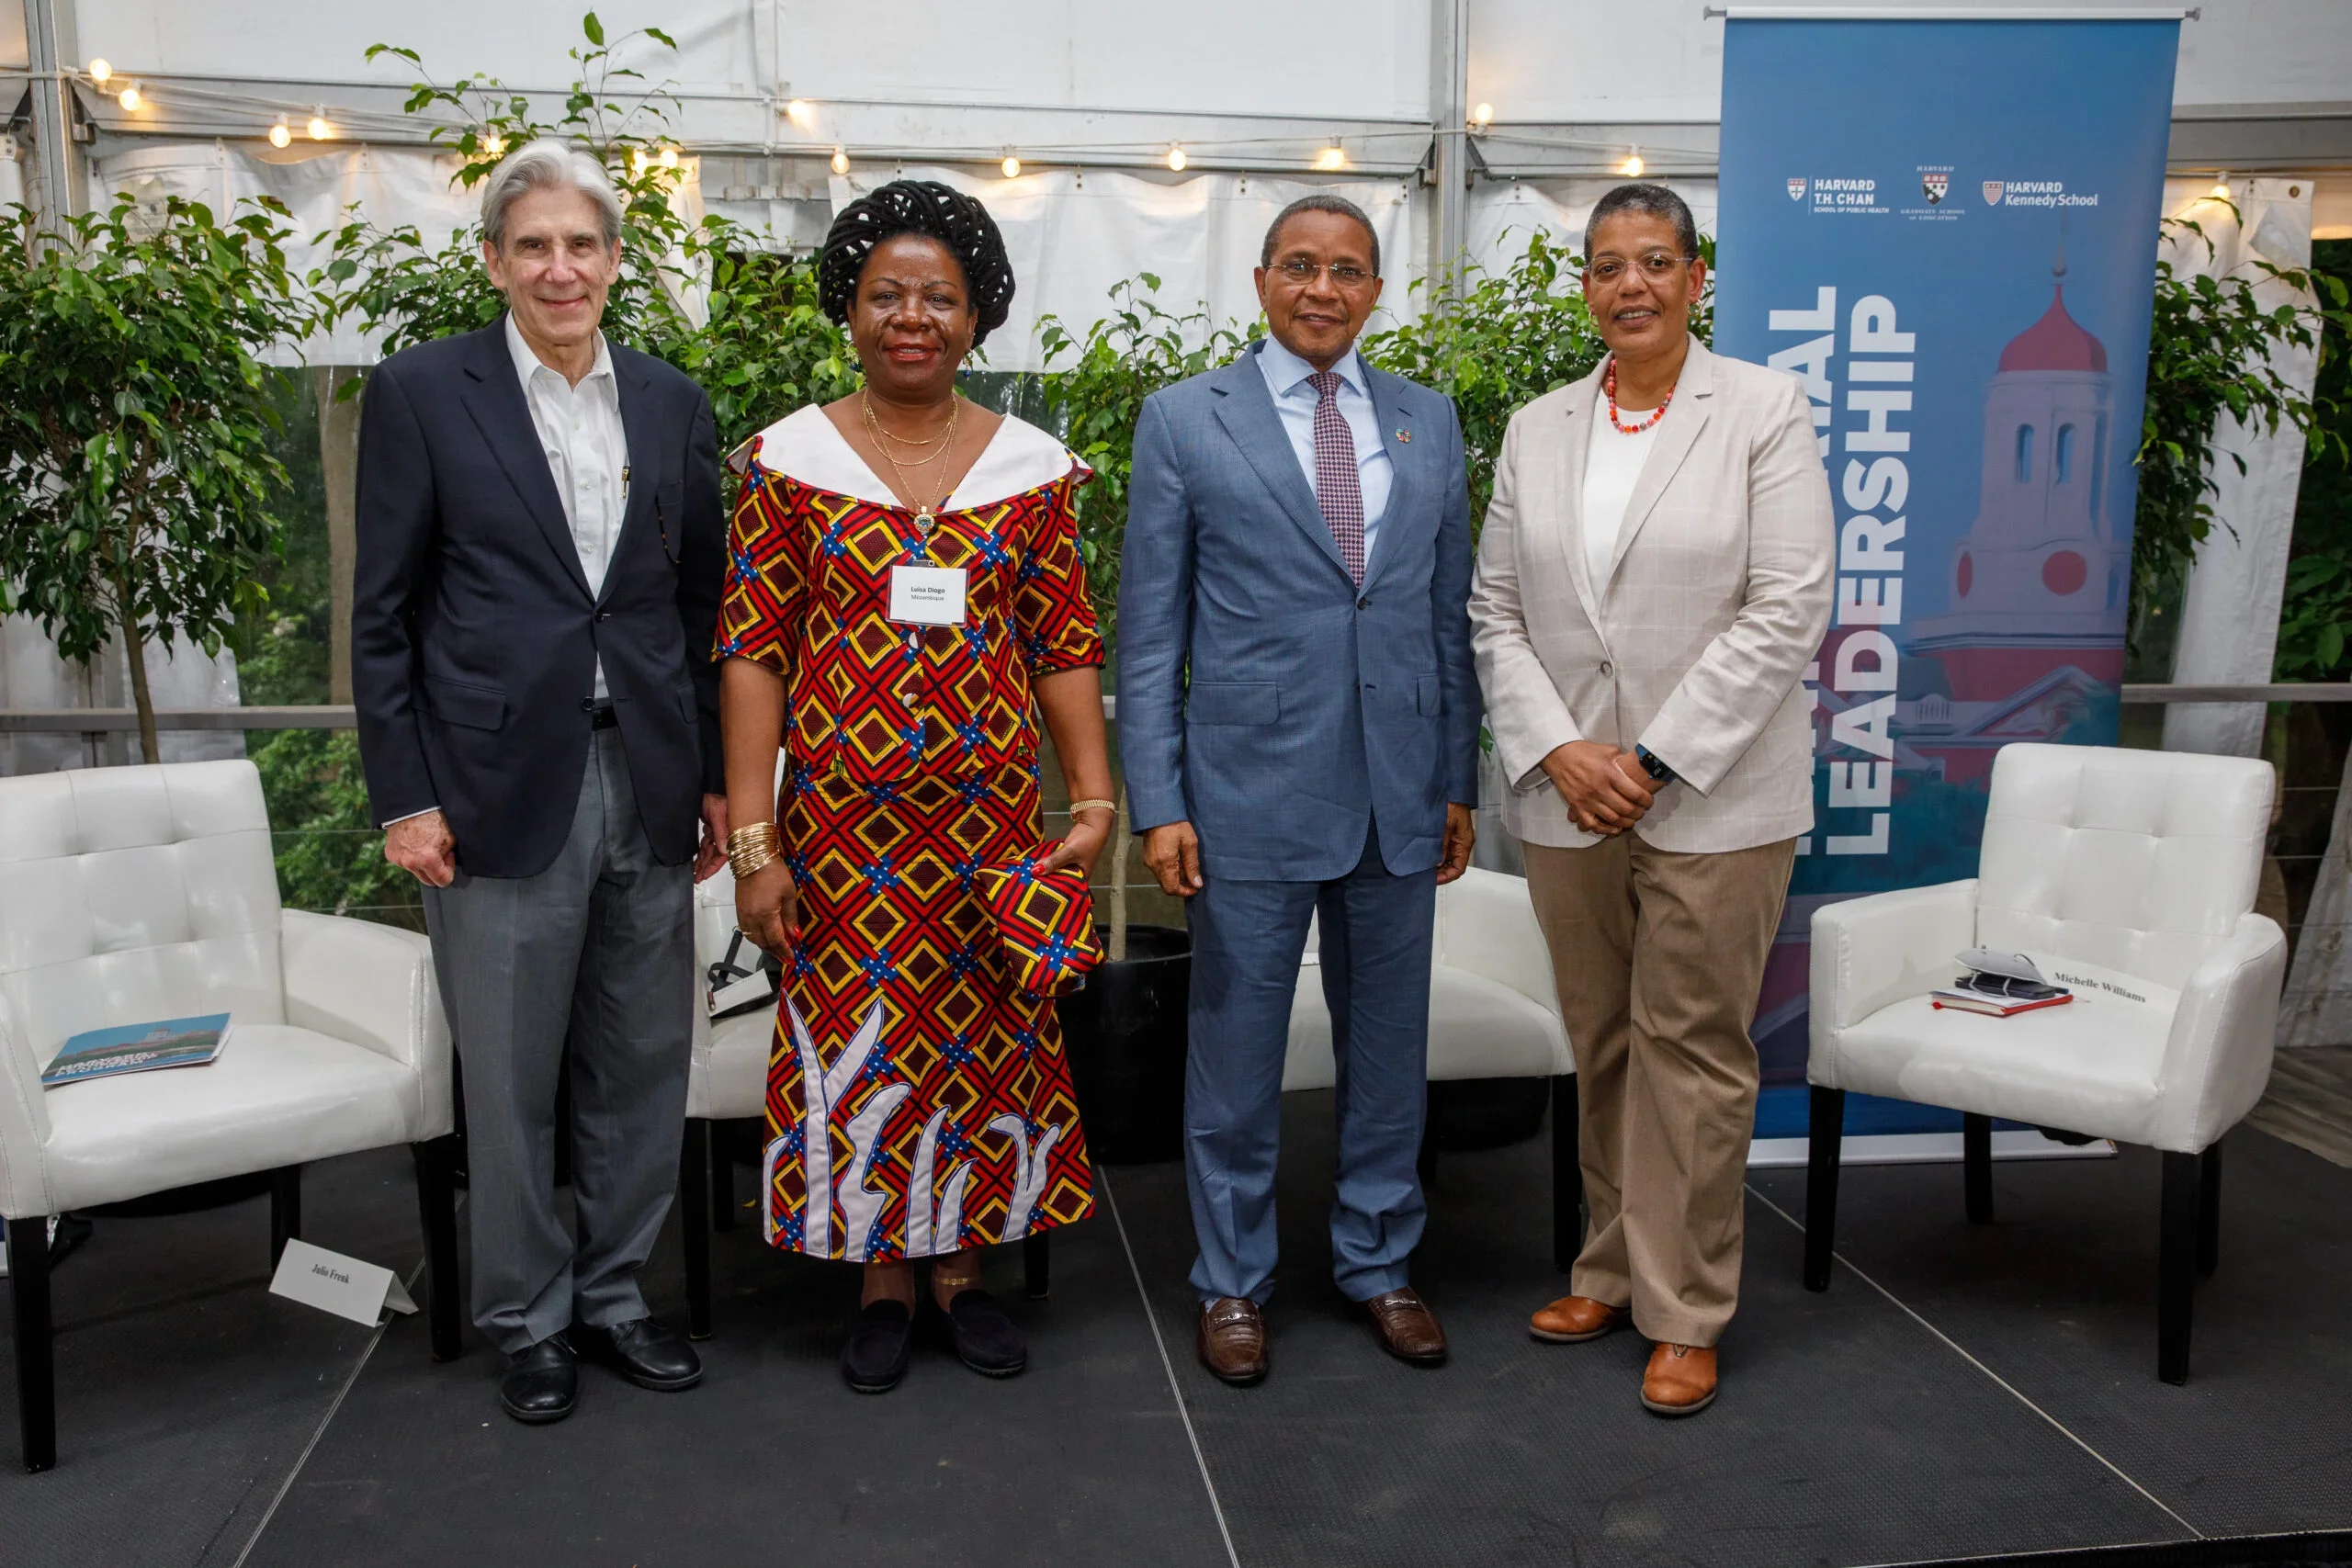 Harvard Ministerial Leadership Program Advisory Board Members from left to right, Julio Frenk, Luisa Diogo, H.E. Jakaya Kikwete, and Dean Michelle Williams during the Program’s 10th Anniversary Celebration in 2022.